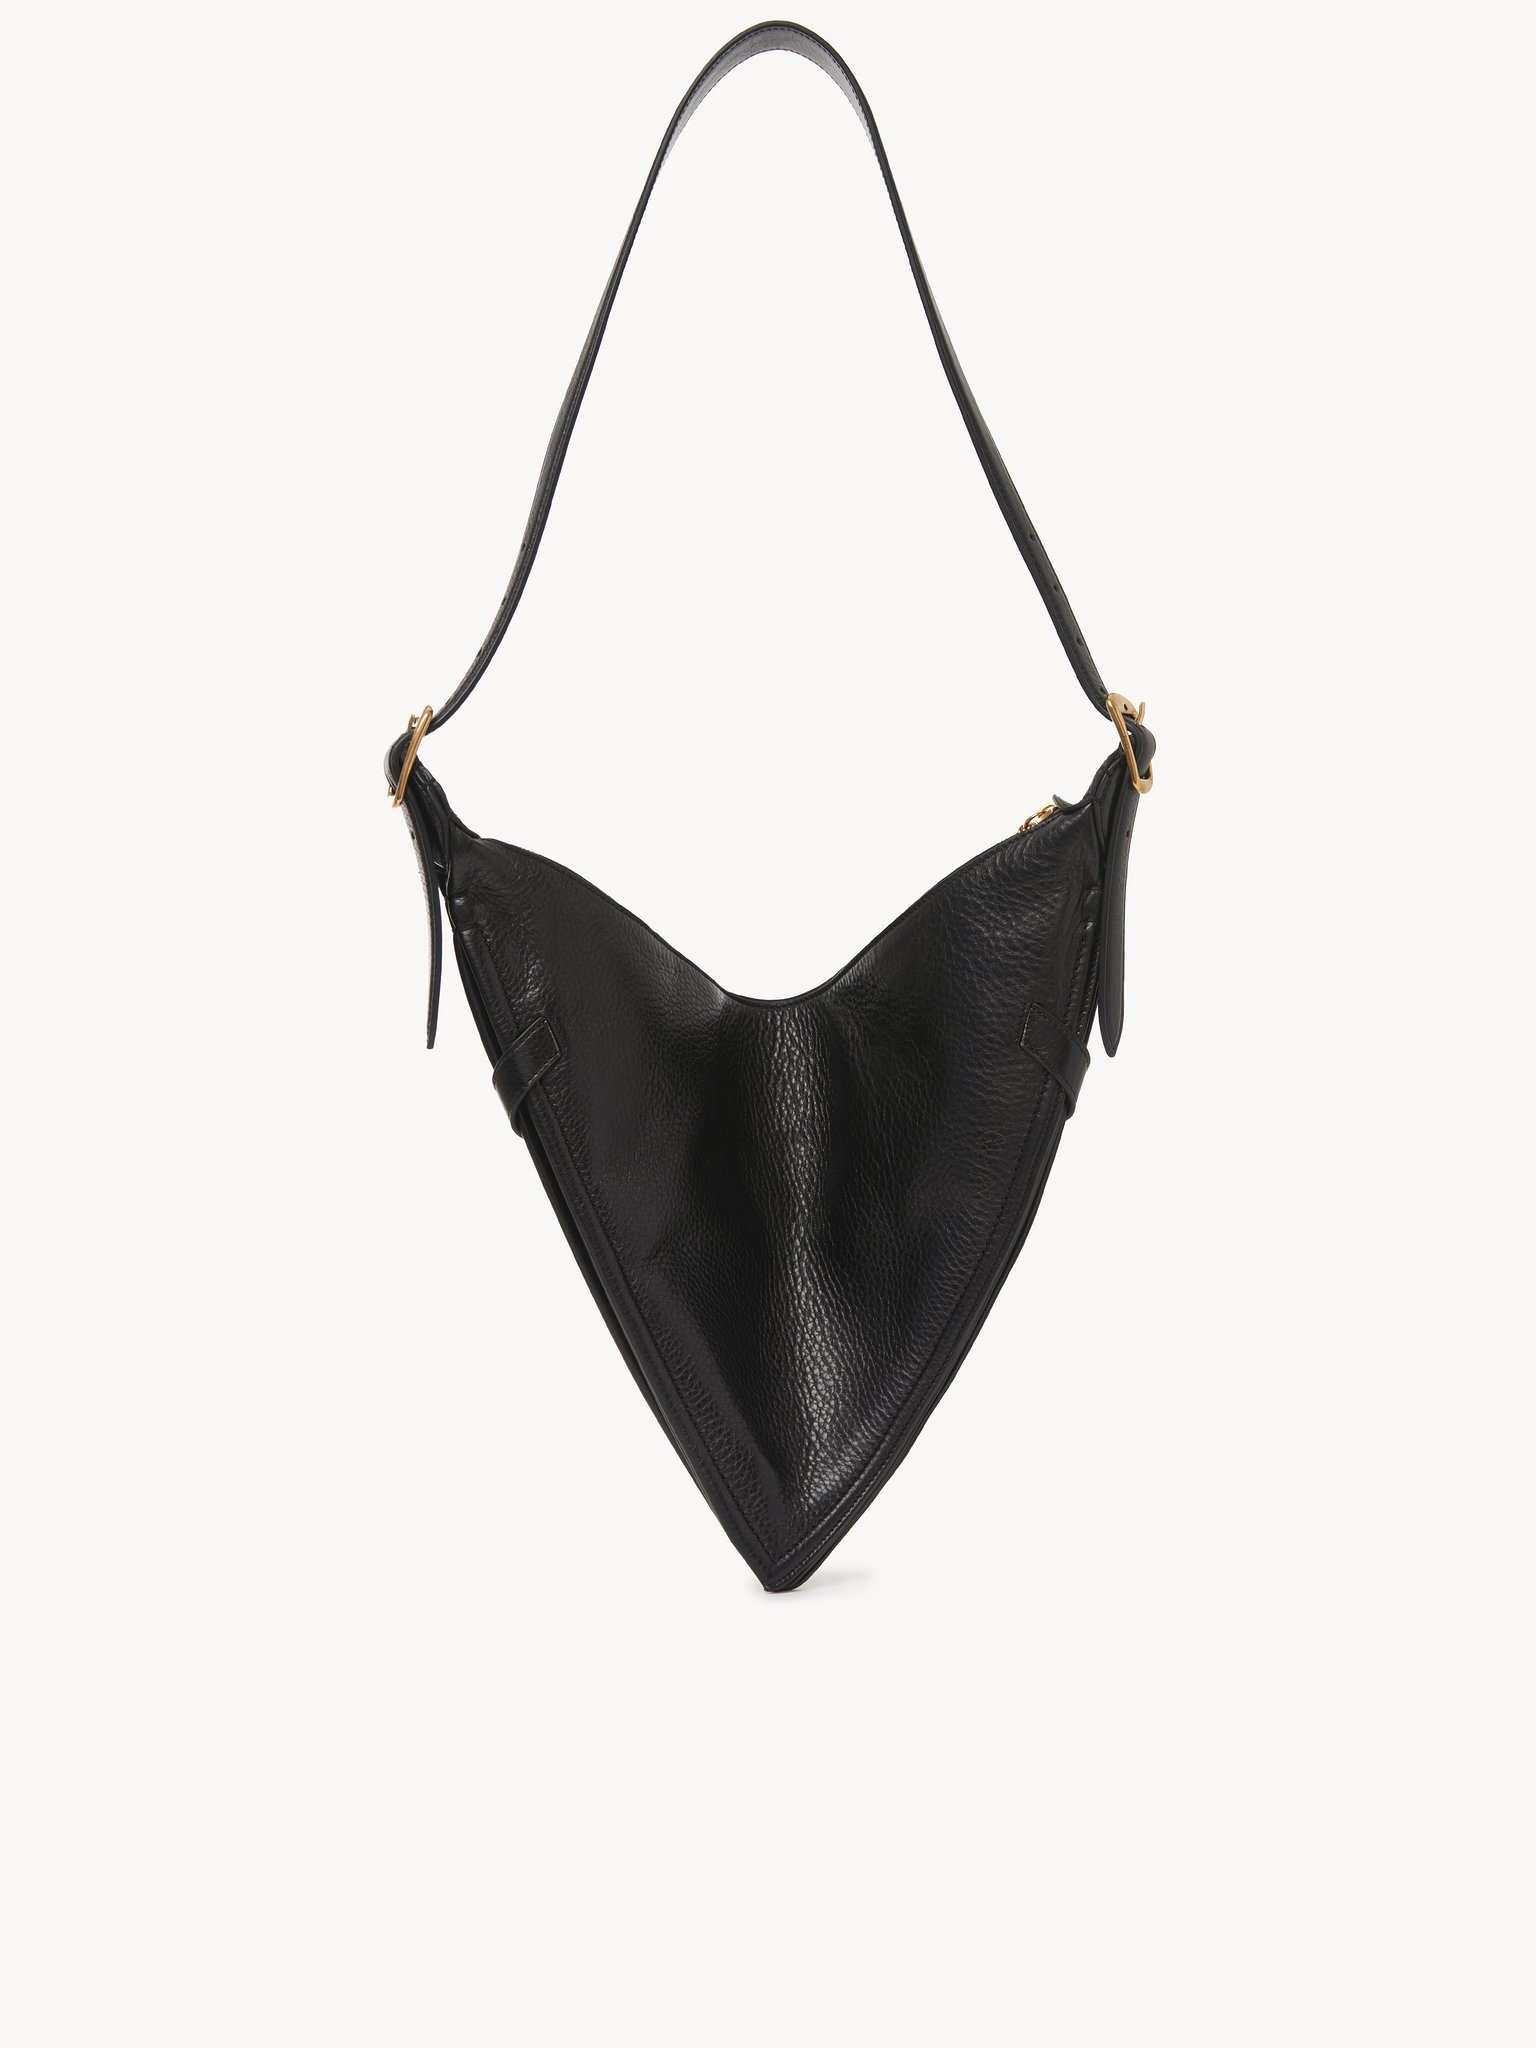 CAPE BAG IN GRAINED LEATHER - 4